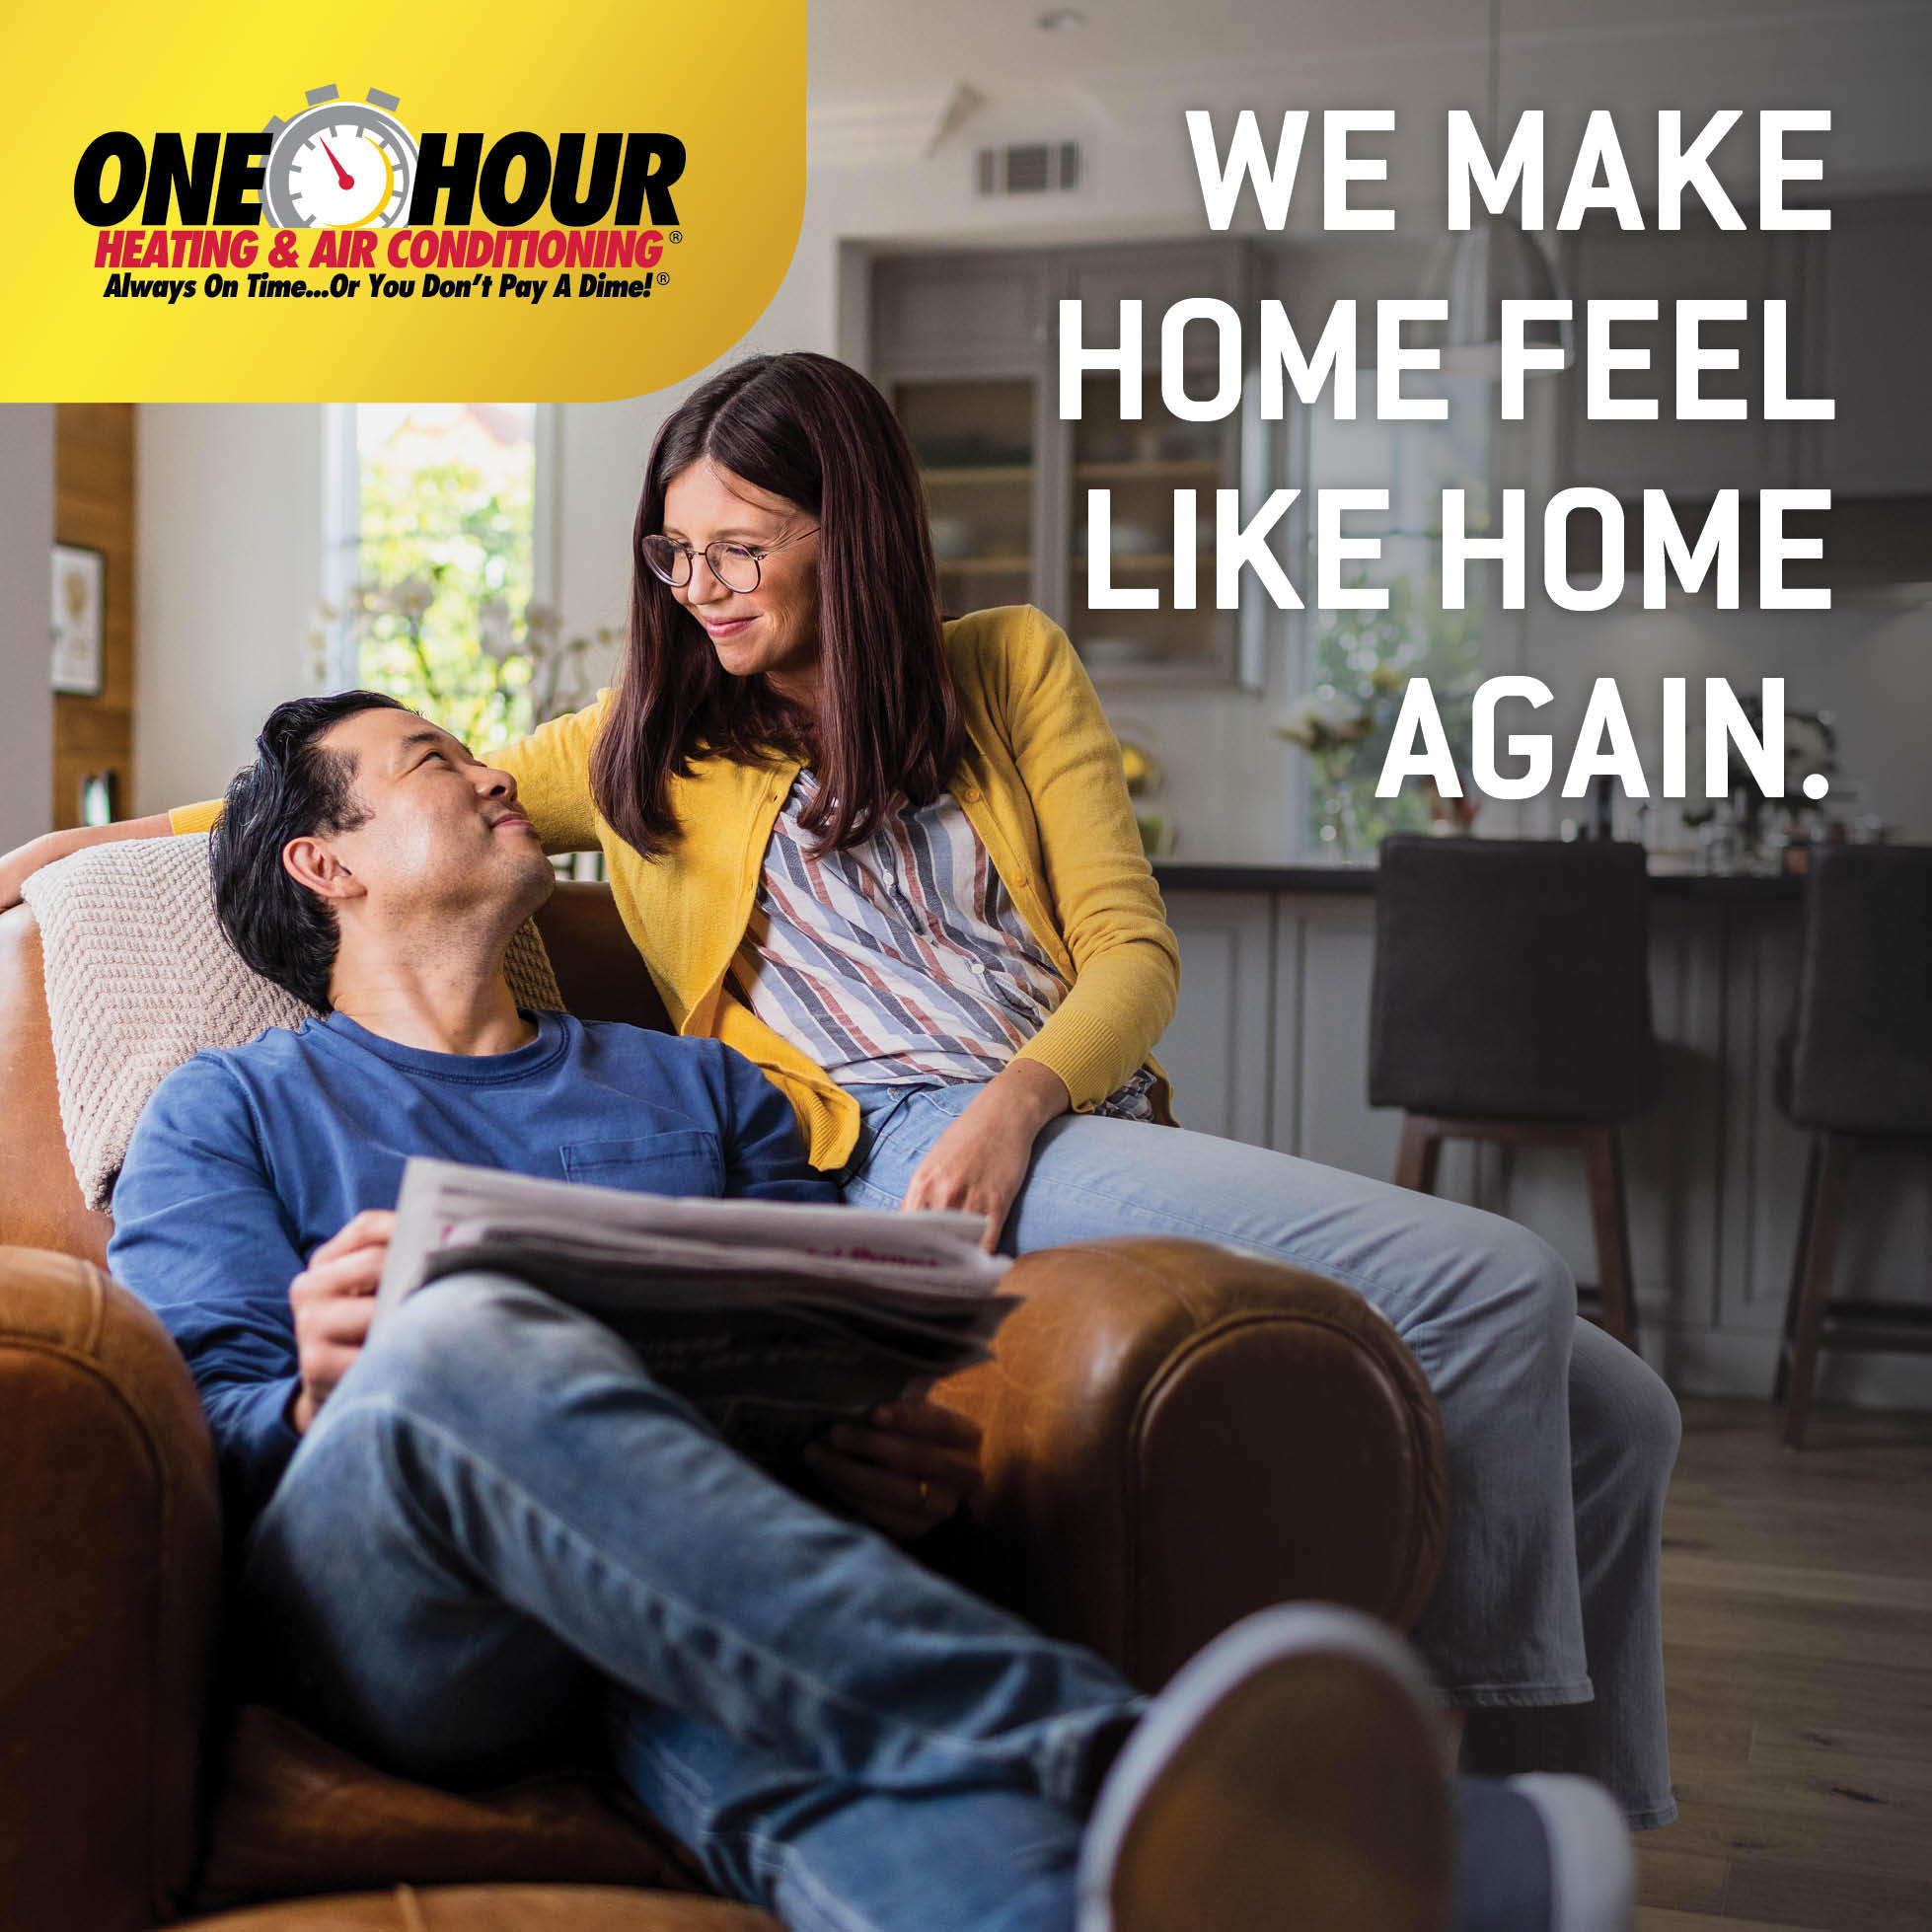 Man and woman sitting in brown leather chair looking and smiling at each other with overlay text that says We make home feel like home again and the One Hour Logo | One Hour Heating & Air Conditioning |  Proudly serving  Cedar Park, Leander, Liberty Hill, & Lago Vista, TX and surrounding areas